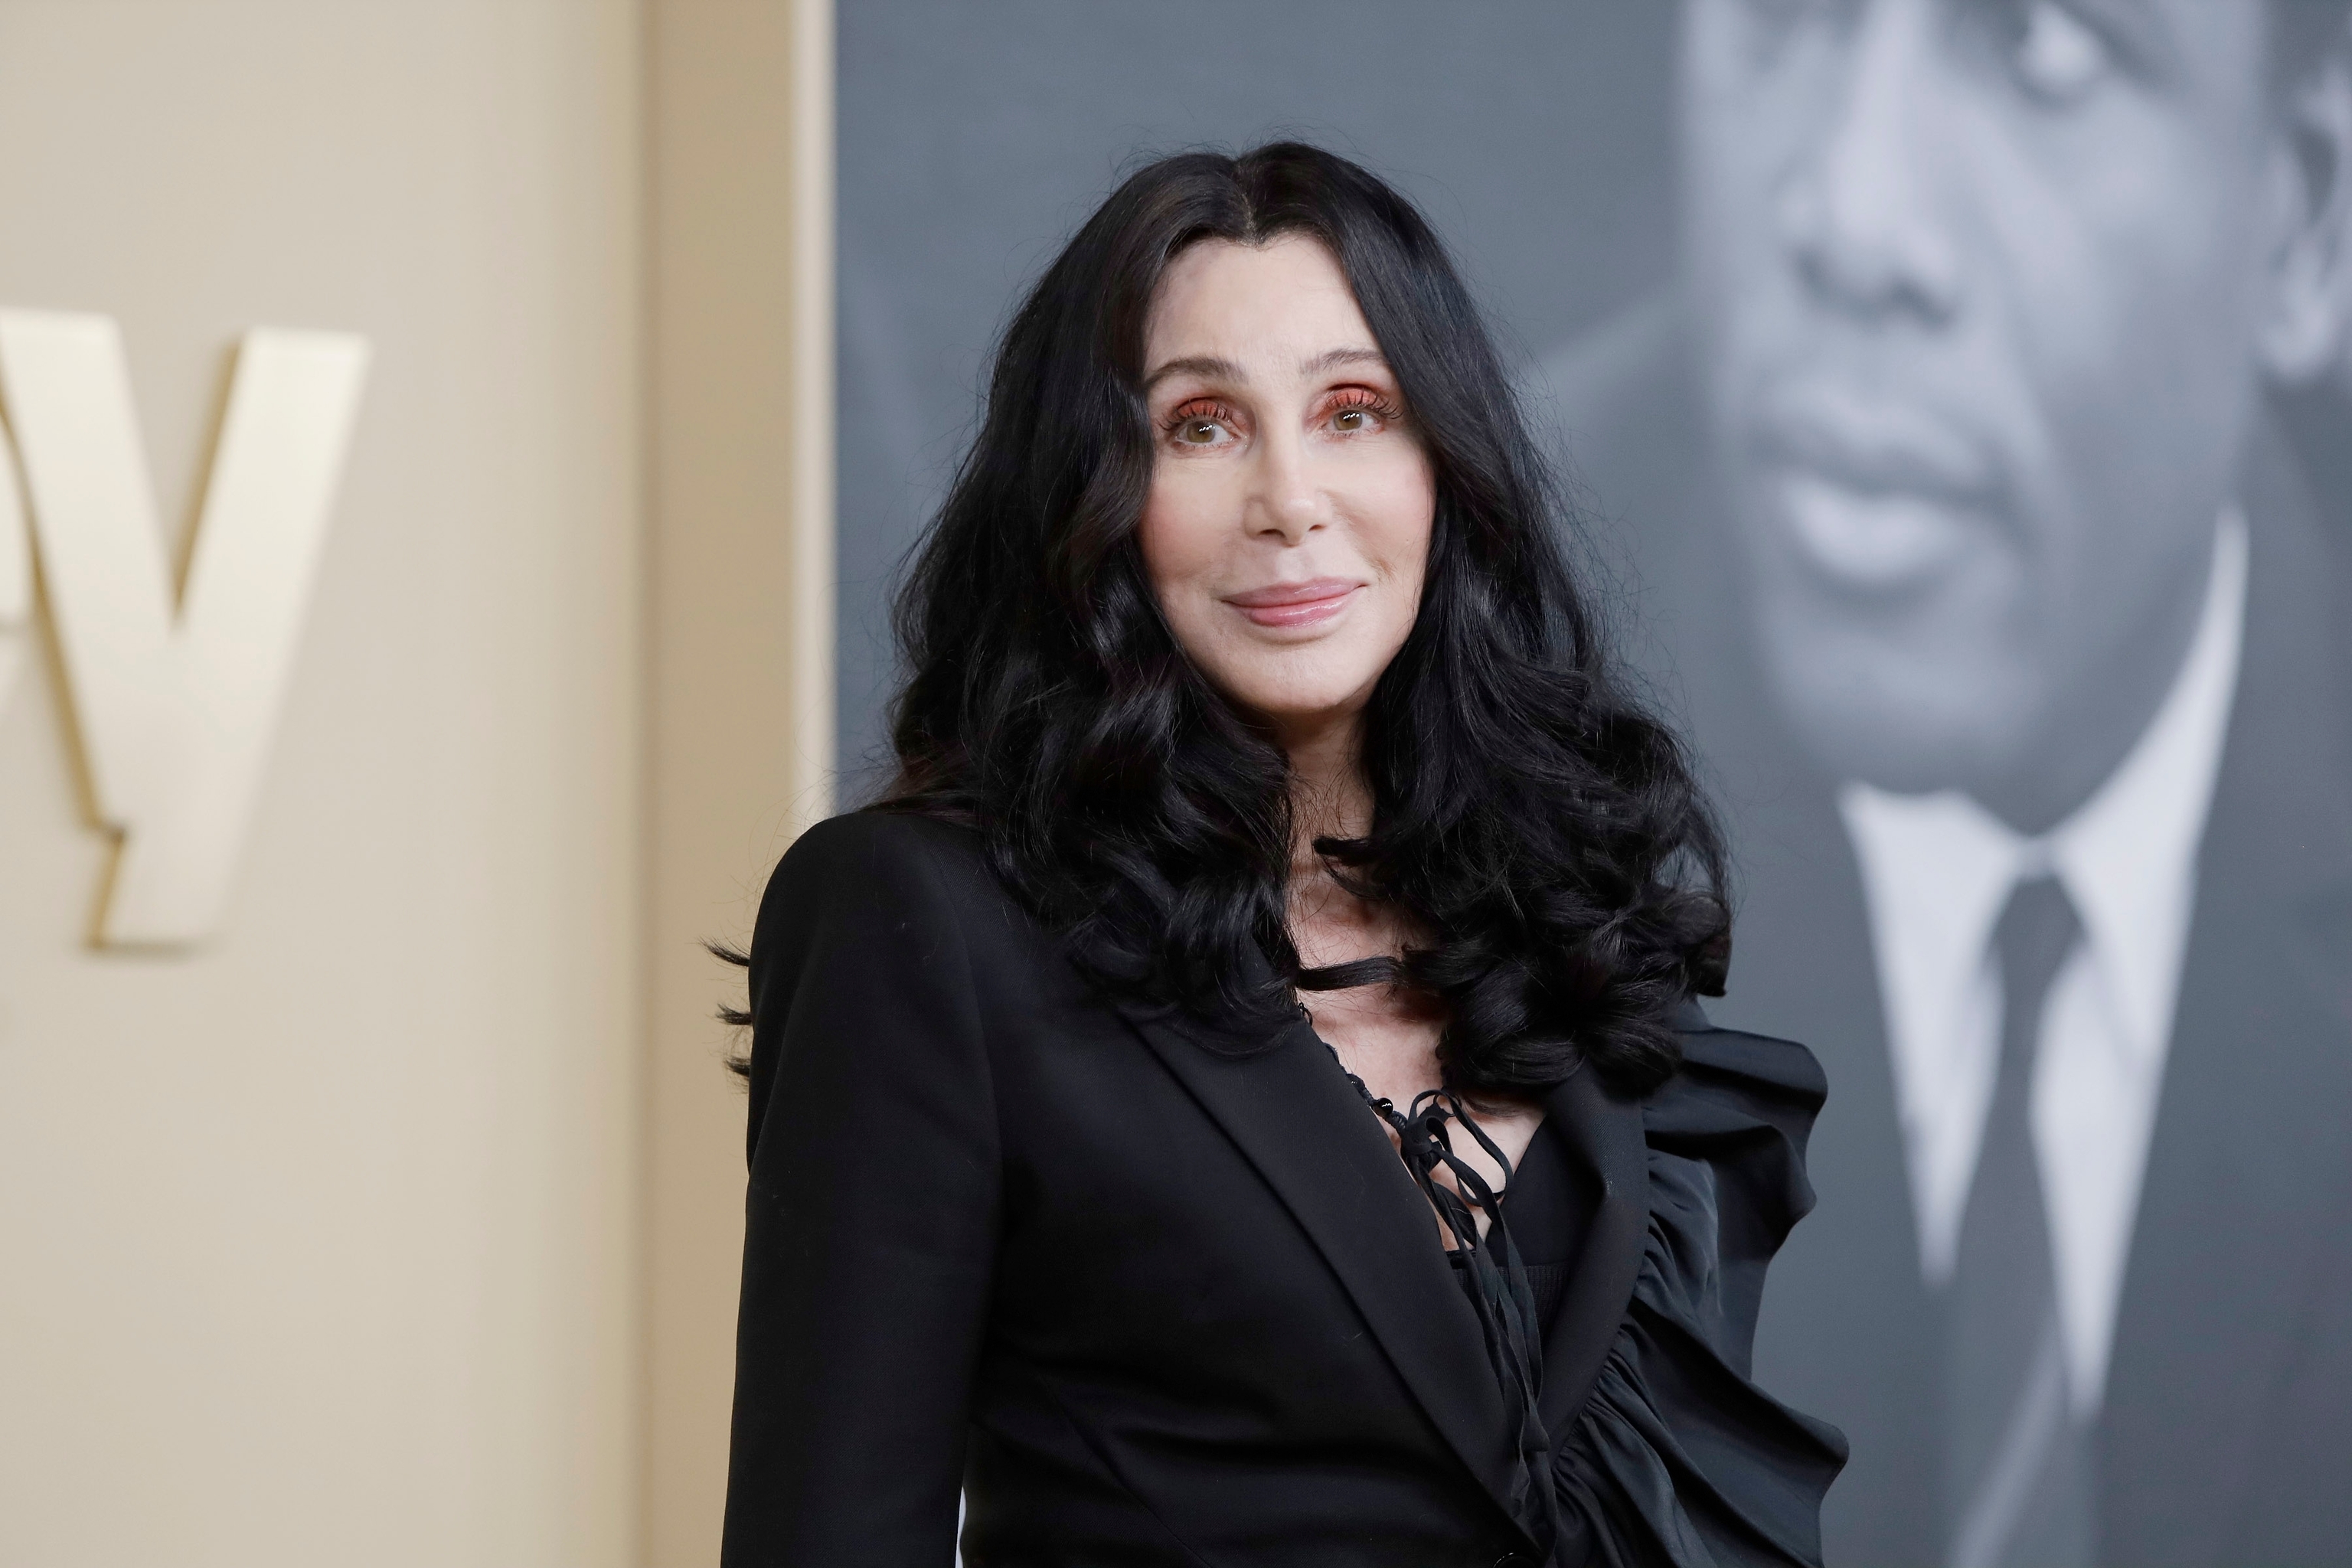 Cher at the Sidney Premiere in Los Angeles in 2022.